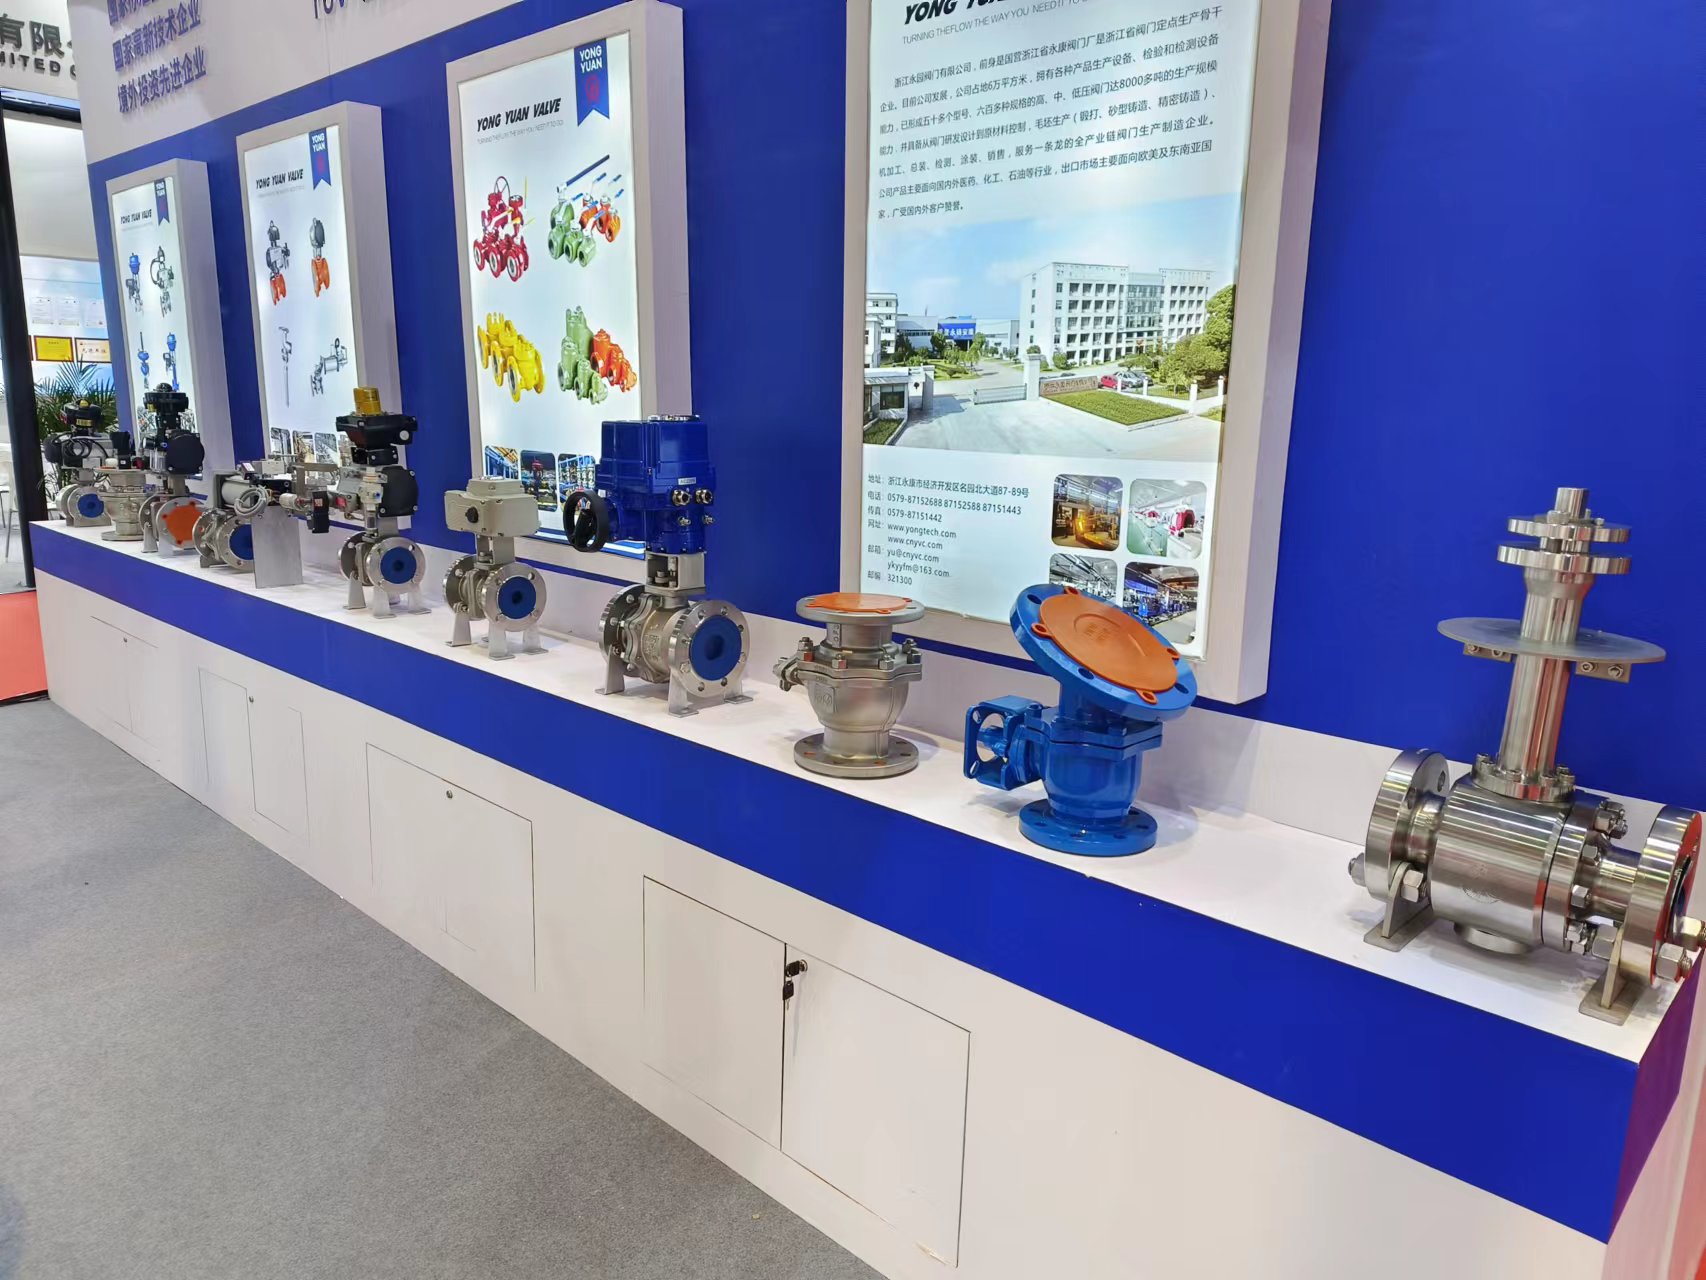 Participated in the 11th China International Fluid Machinery Exhibition at NECC (Shanghai)(图5)